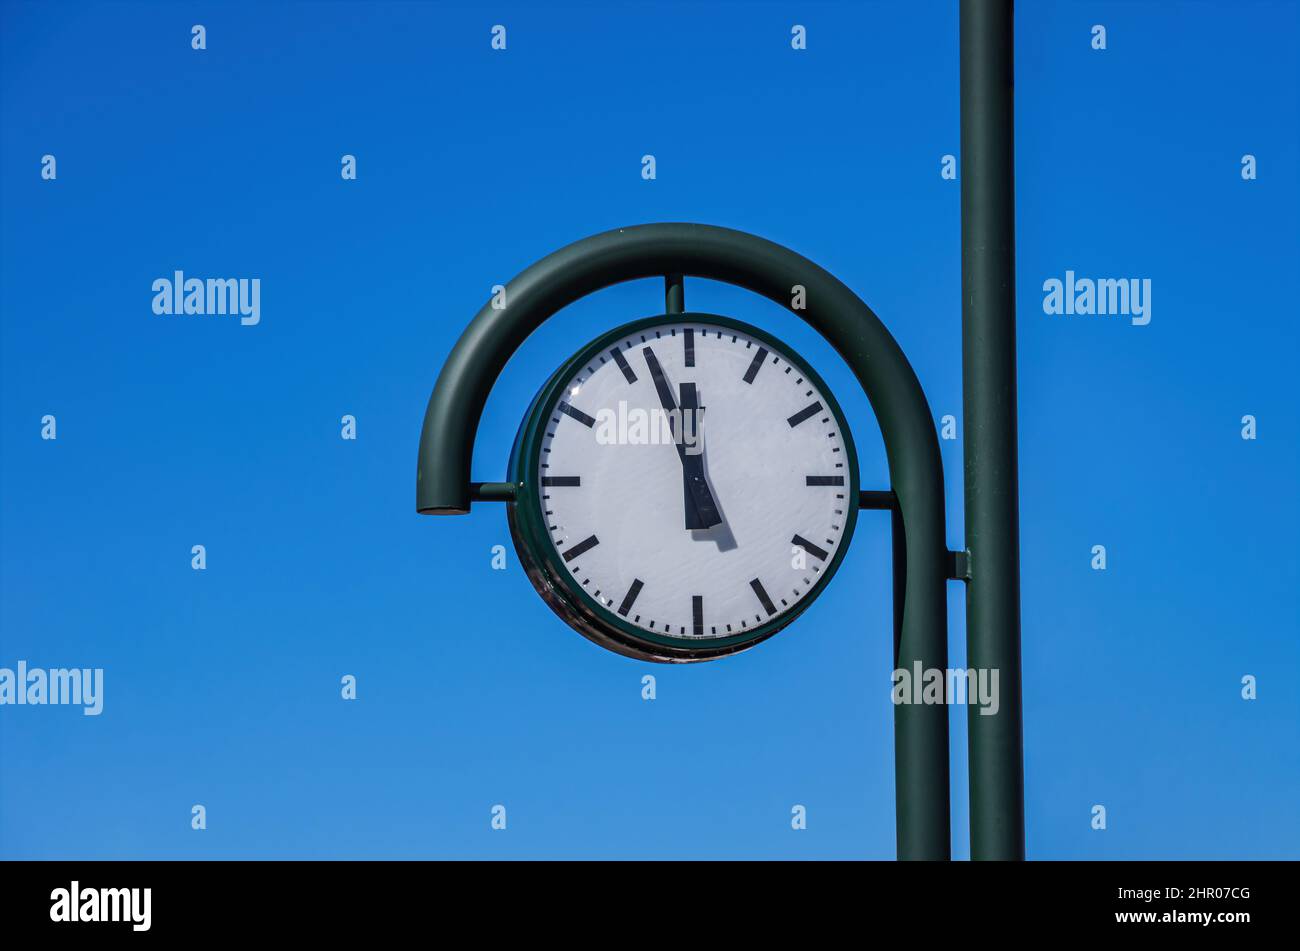 Almost 12, this clock no longer shows 5 to 12, but 3 to 12 instead. Stock Photo